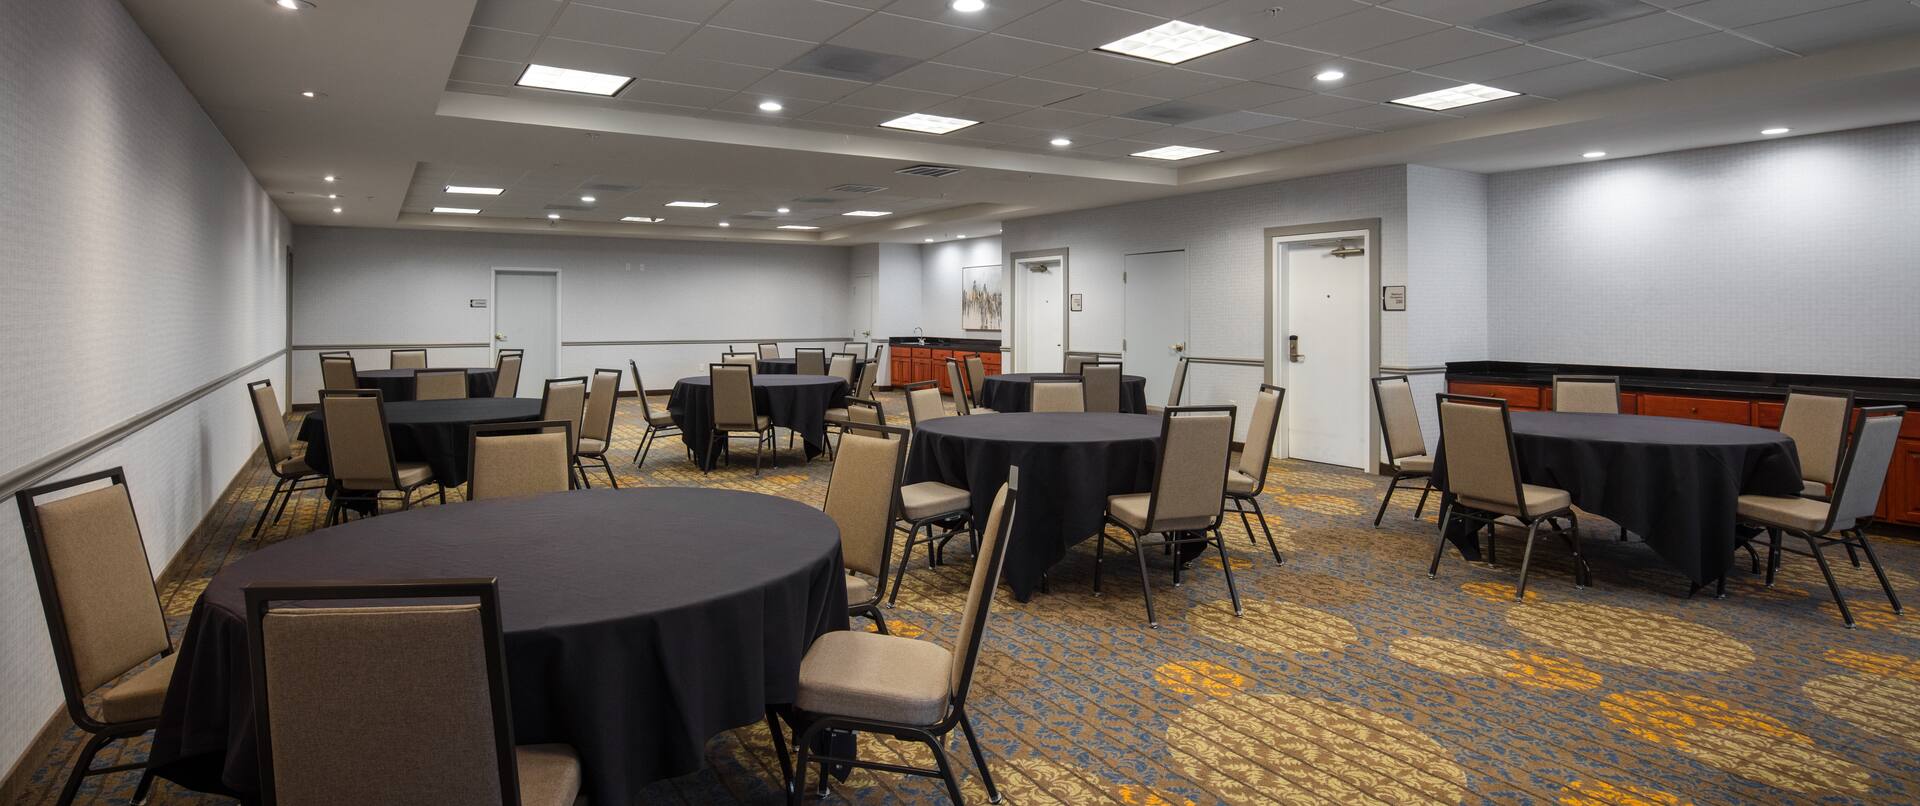 Host a small or large event in our flexible space